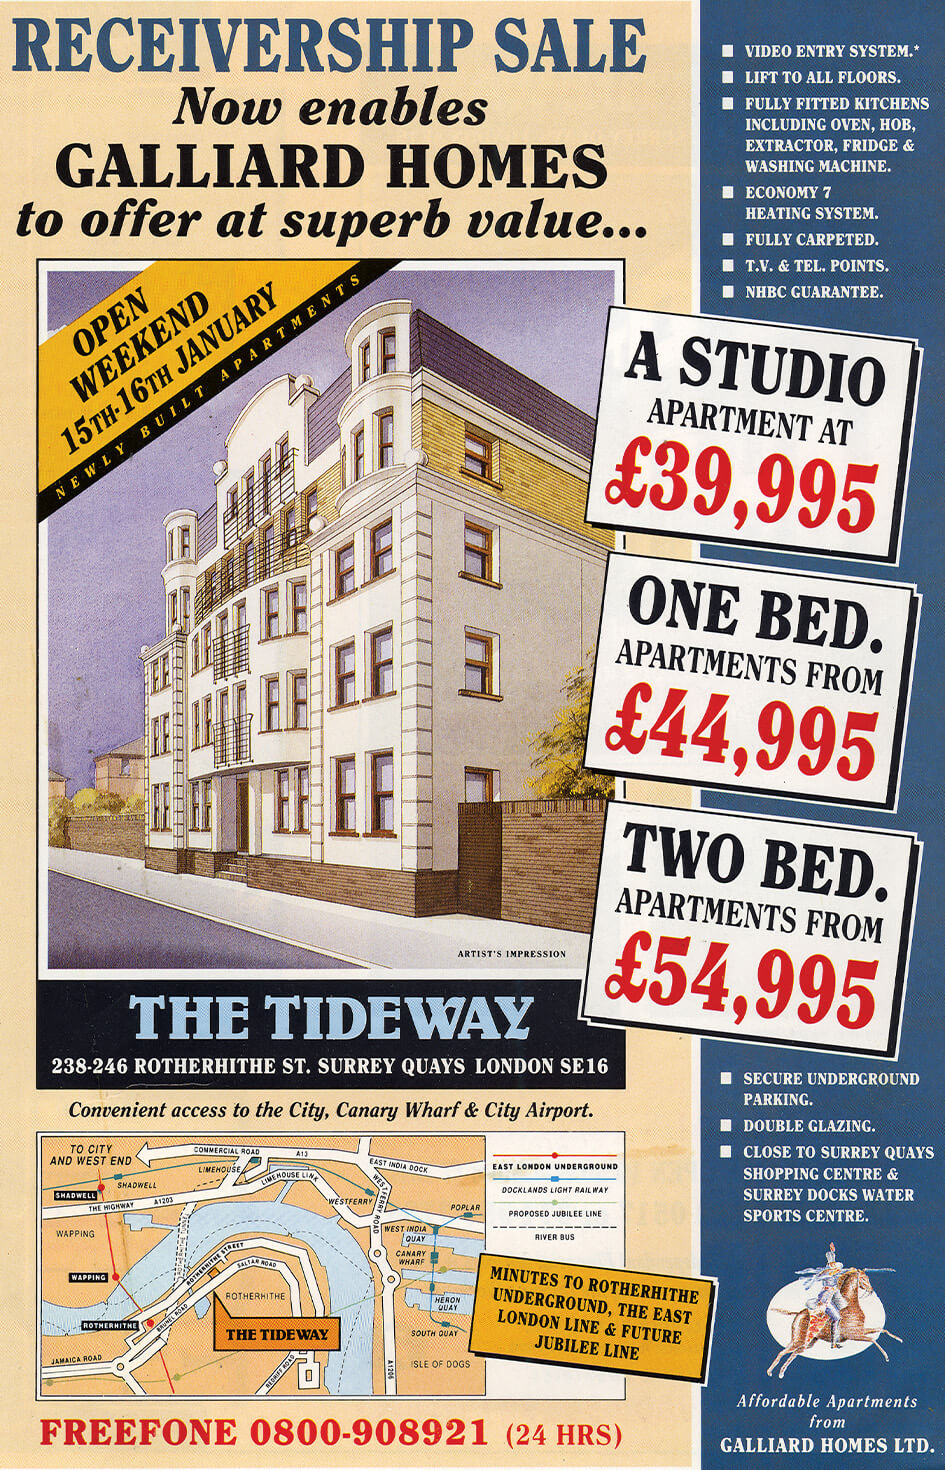 The Tideway by Galliard Homes marketing poster